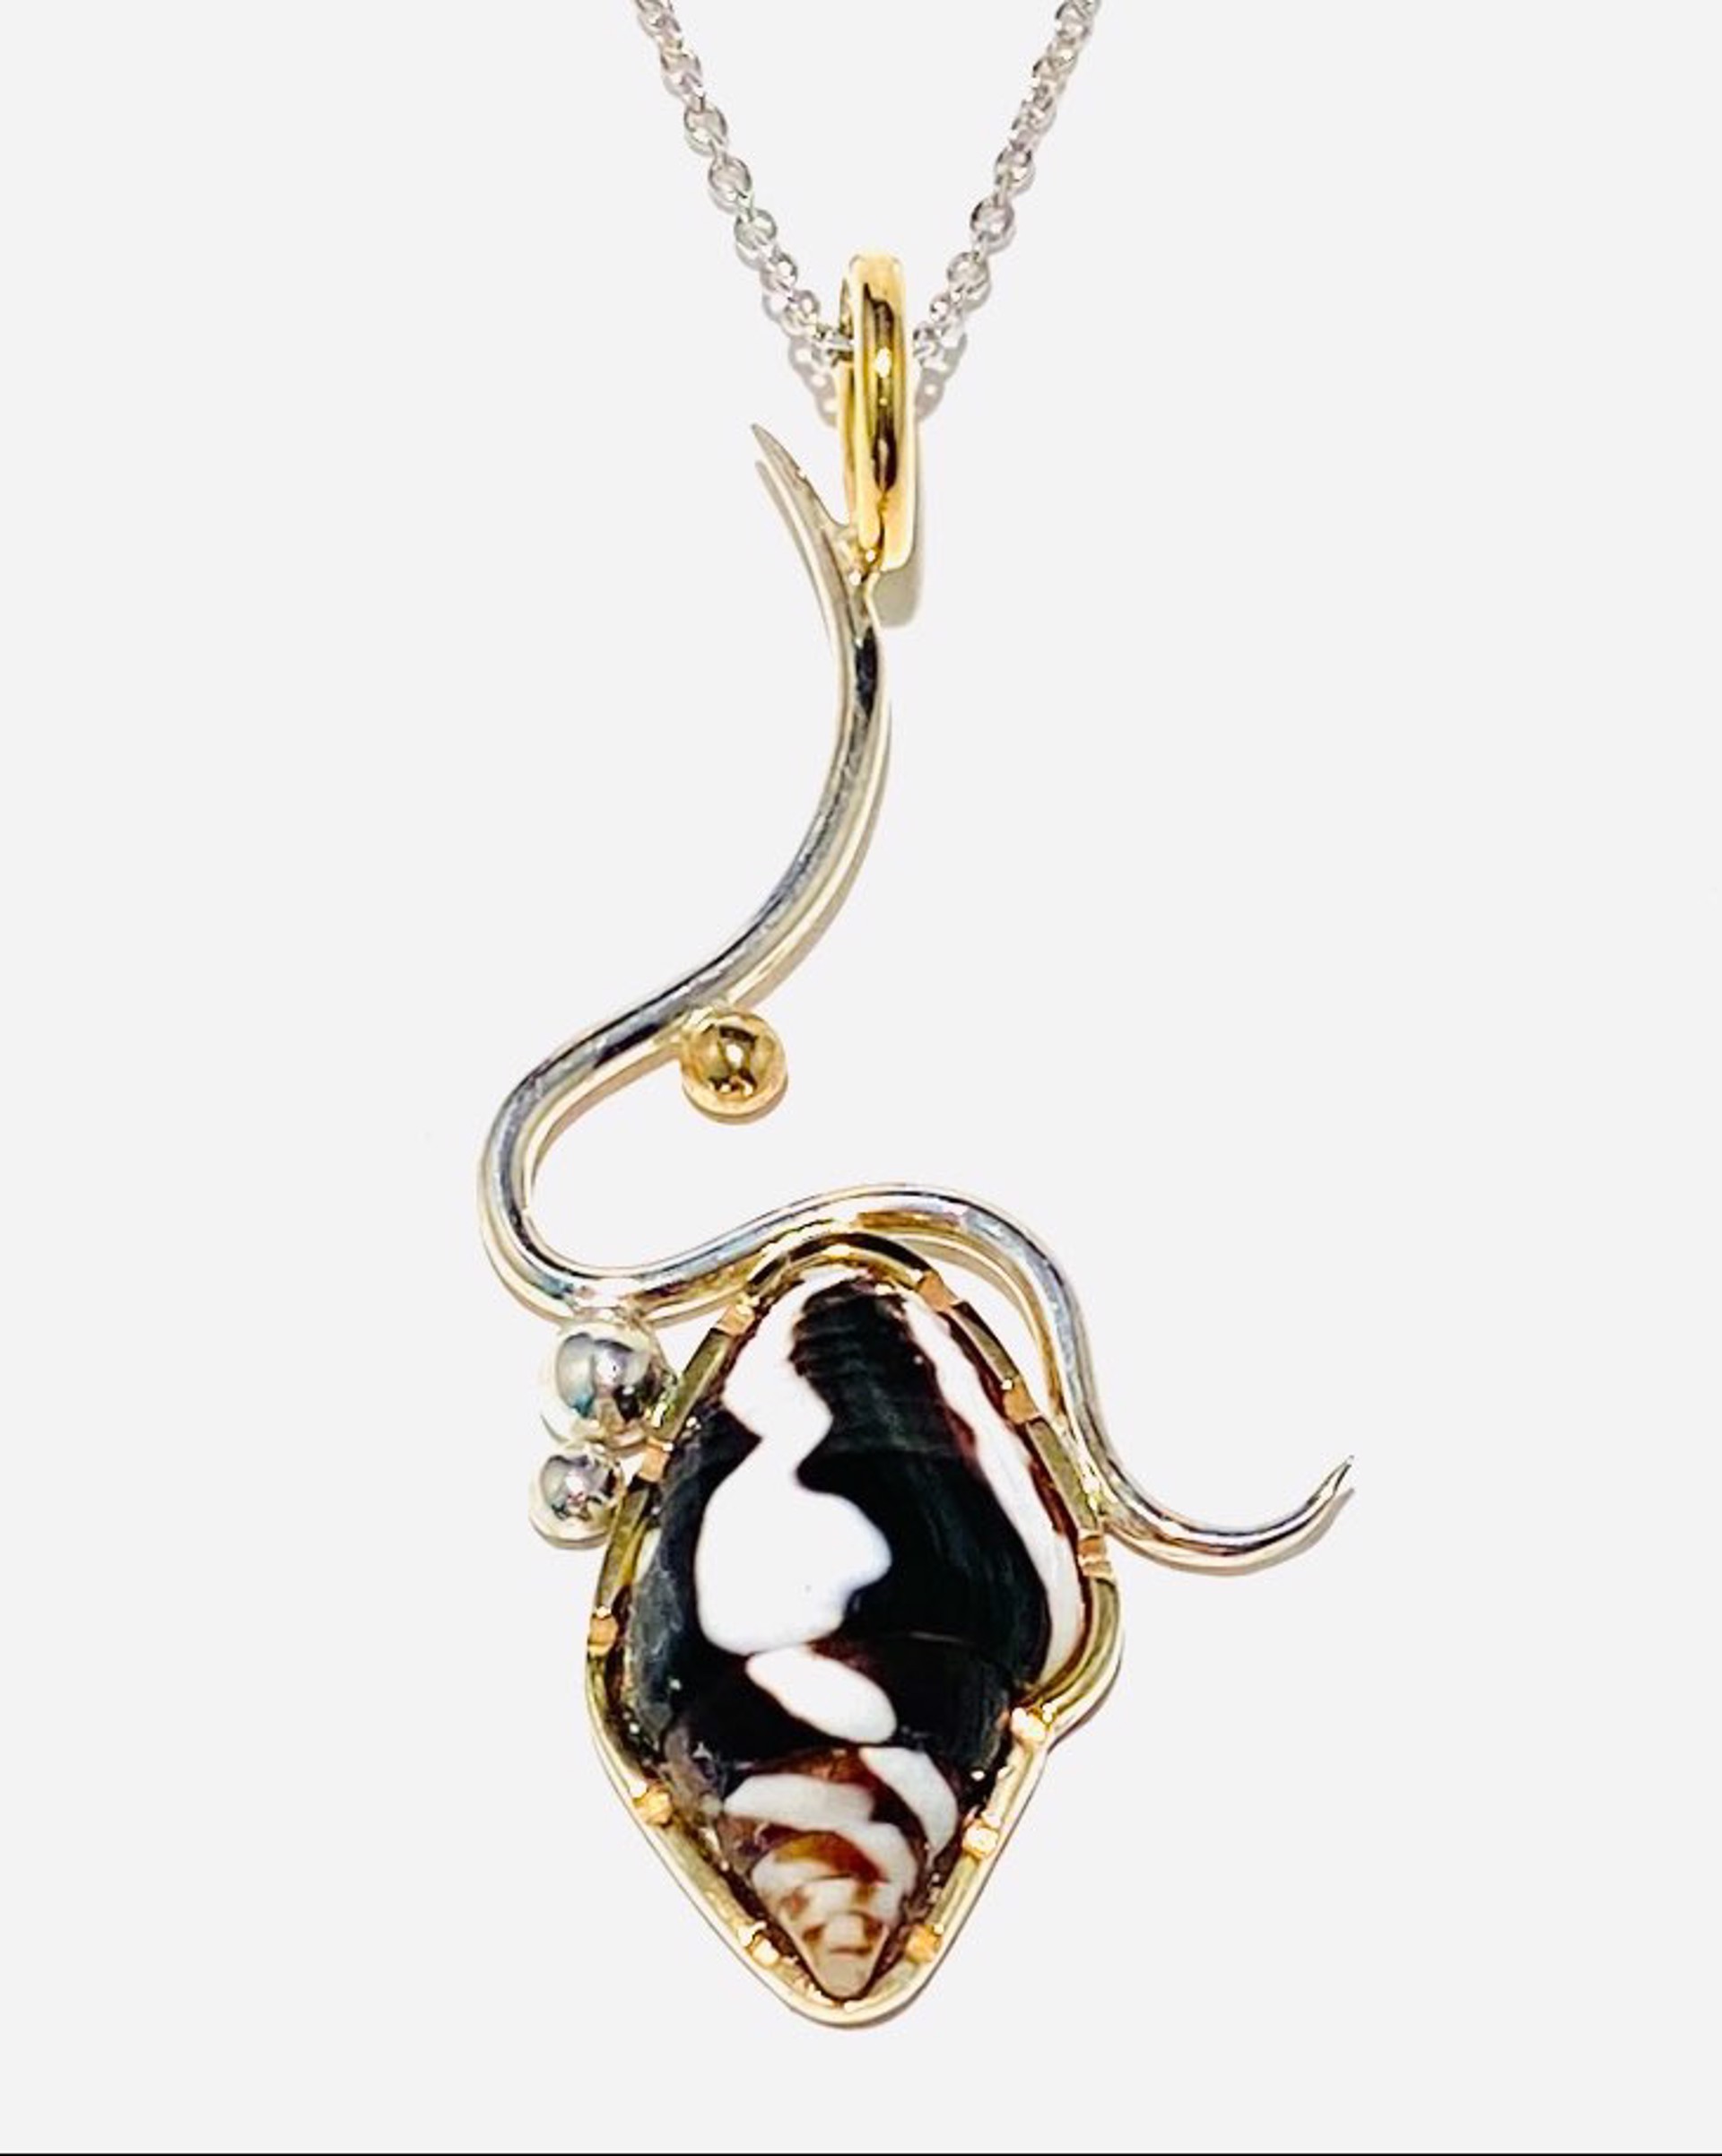 Black and White Dove Snail “Delicate Drop” Pendant 18”Silver Adjustable Chain Necklace BU23-17 by Barbara Umbel